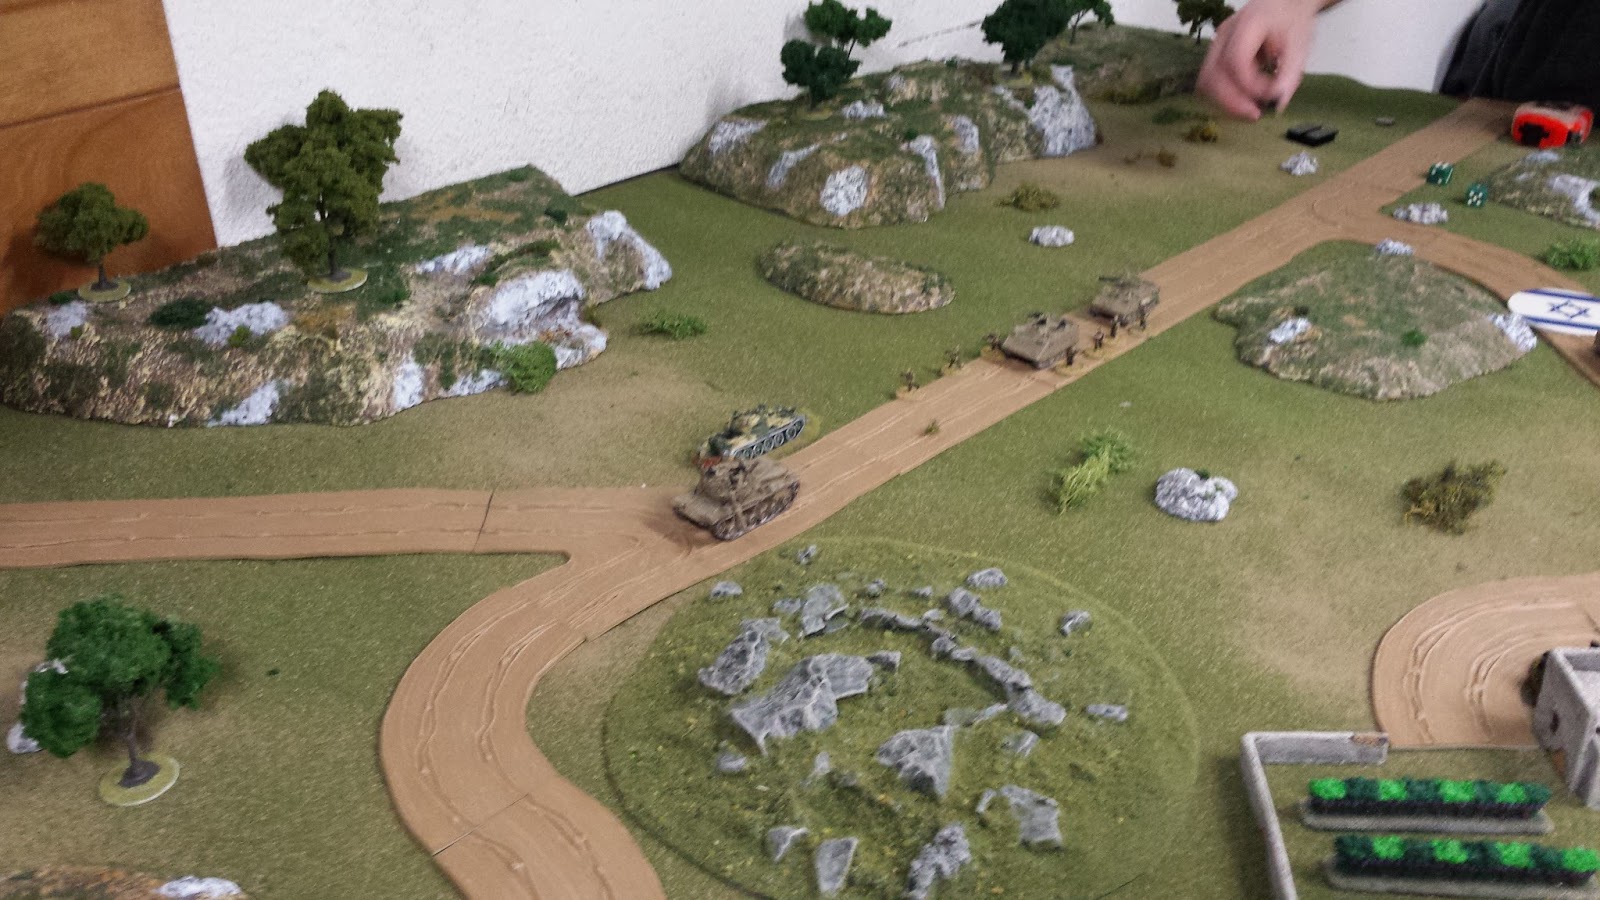 The Magach has its eyes on the prize, but the advance is slow as they round the walled orchard.